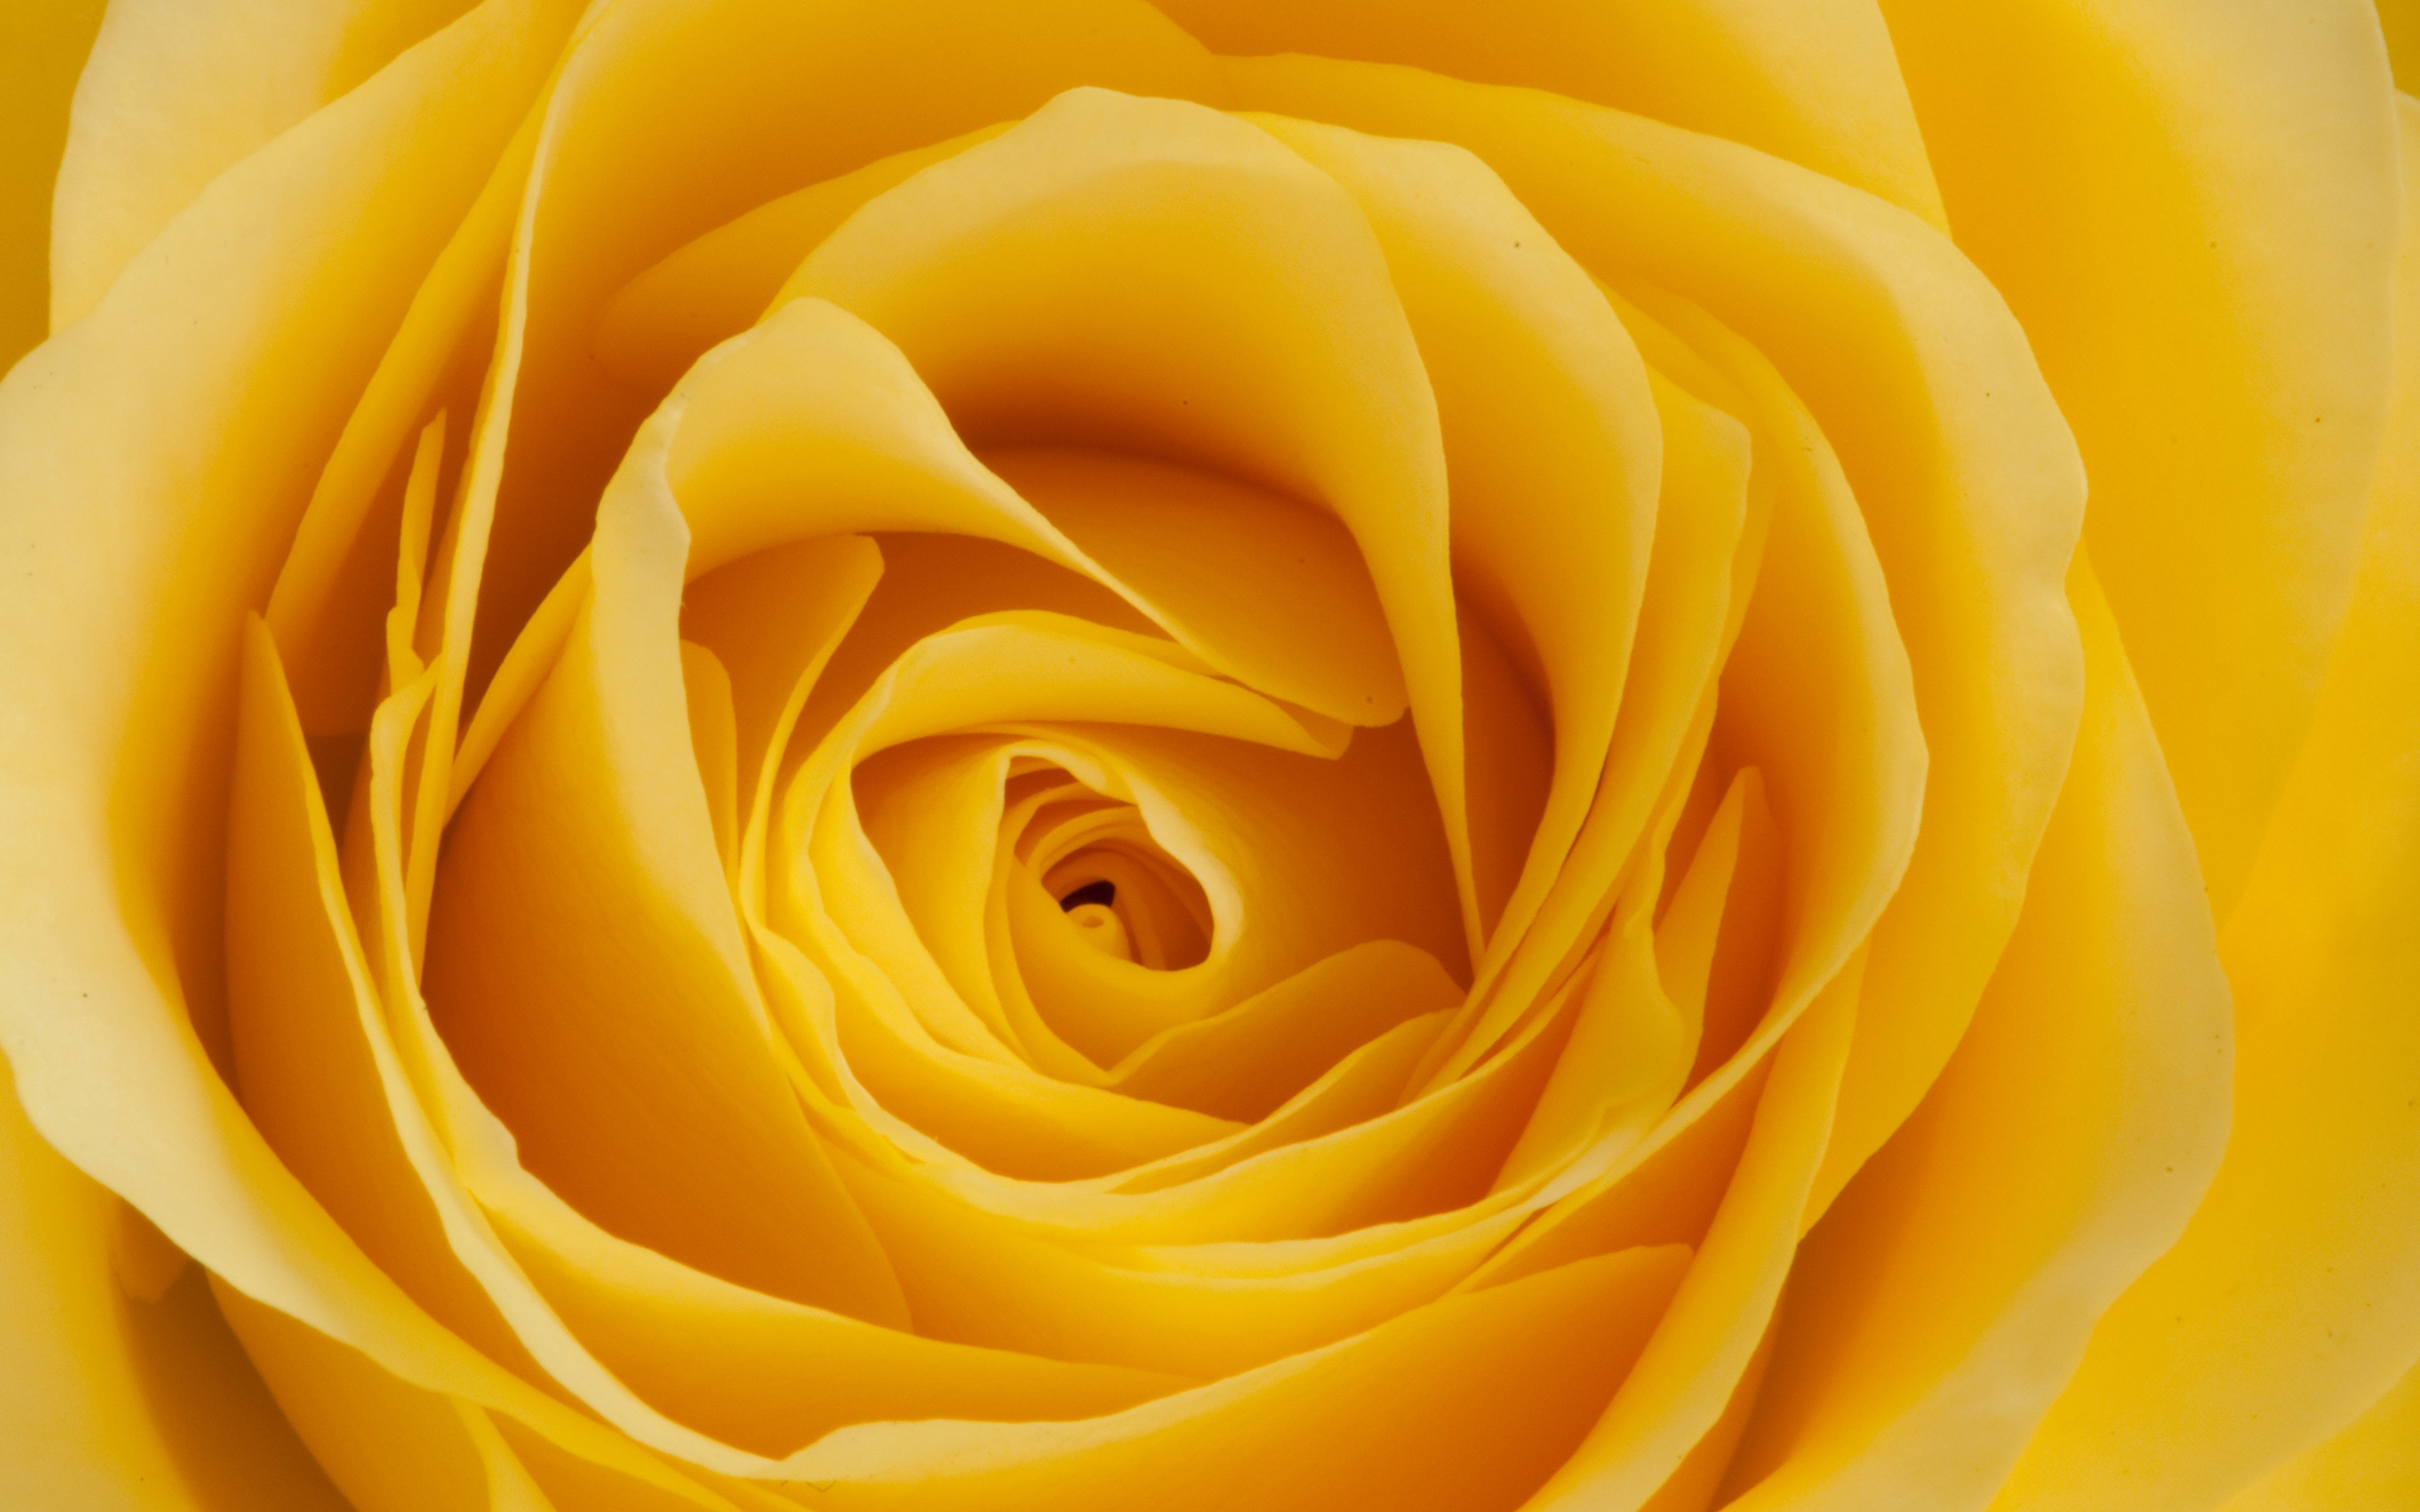 Yellow Rose Stock Photos and Images  123RF